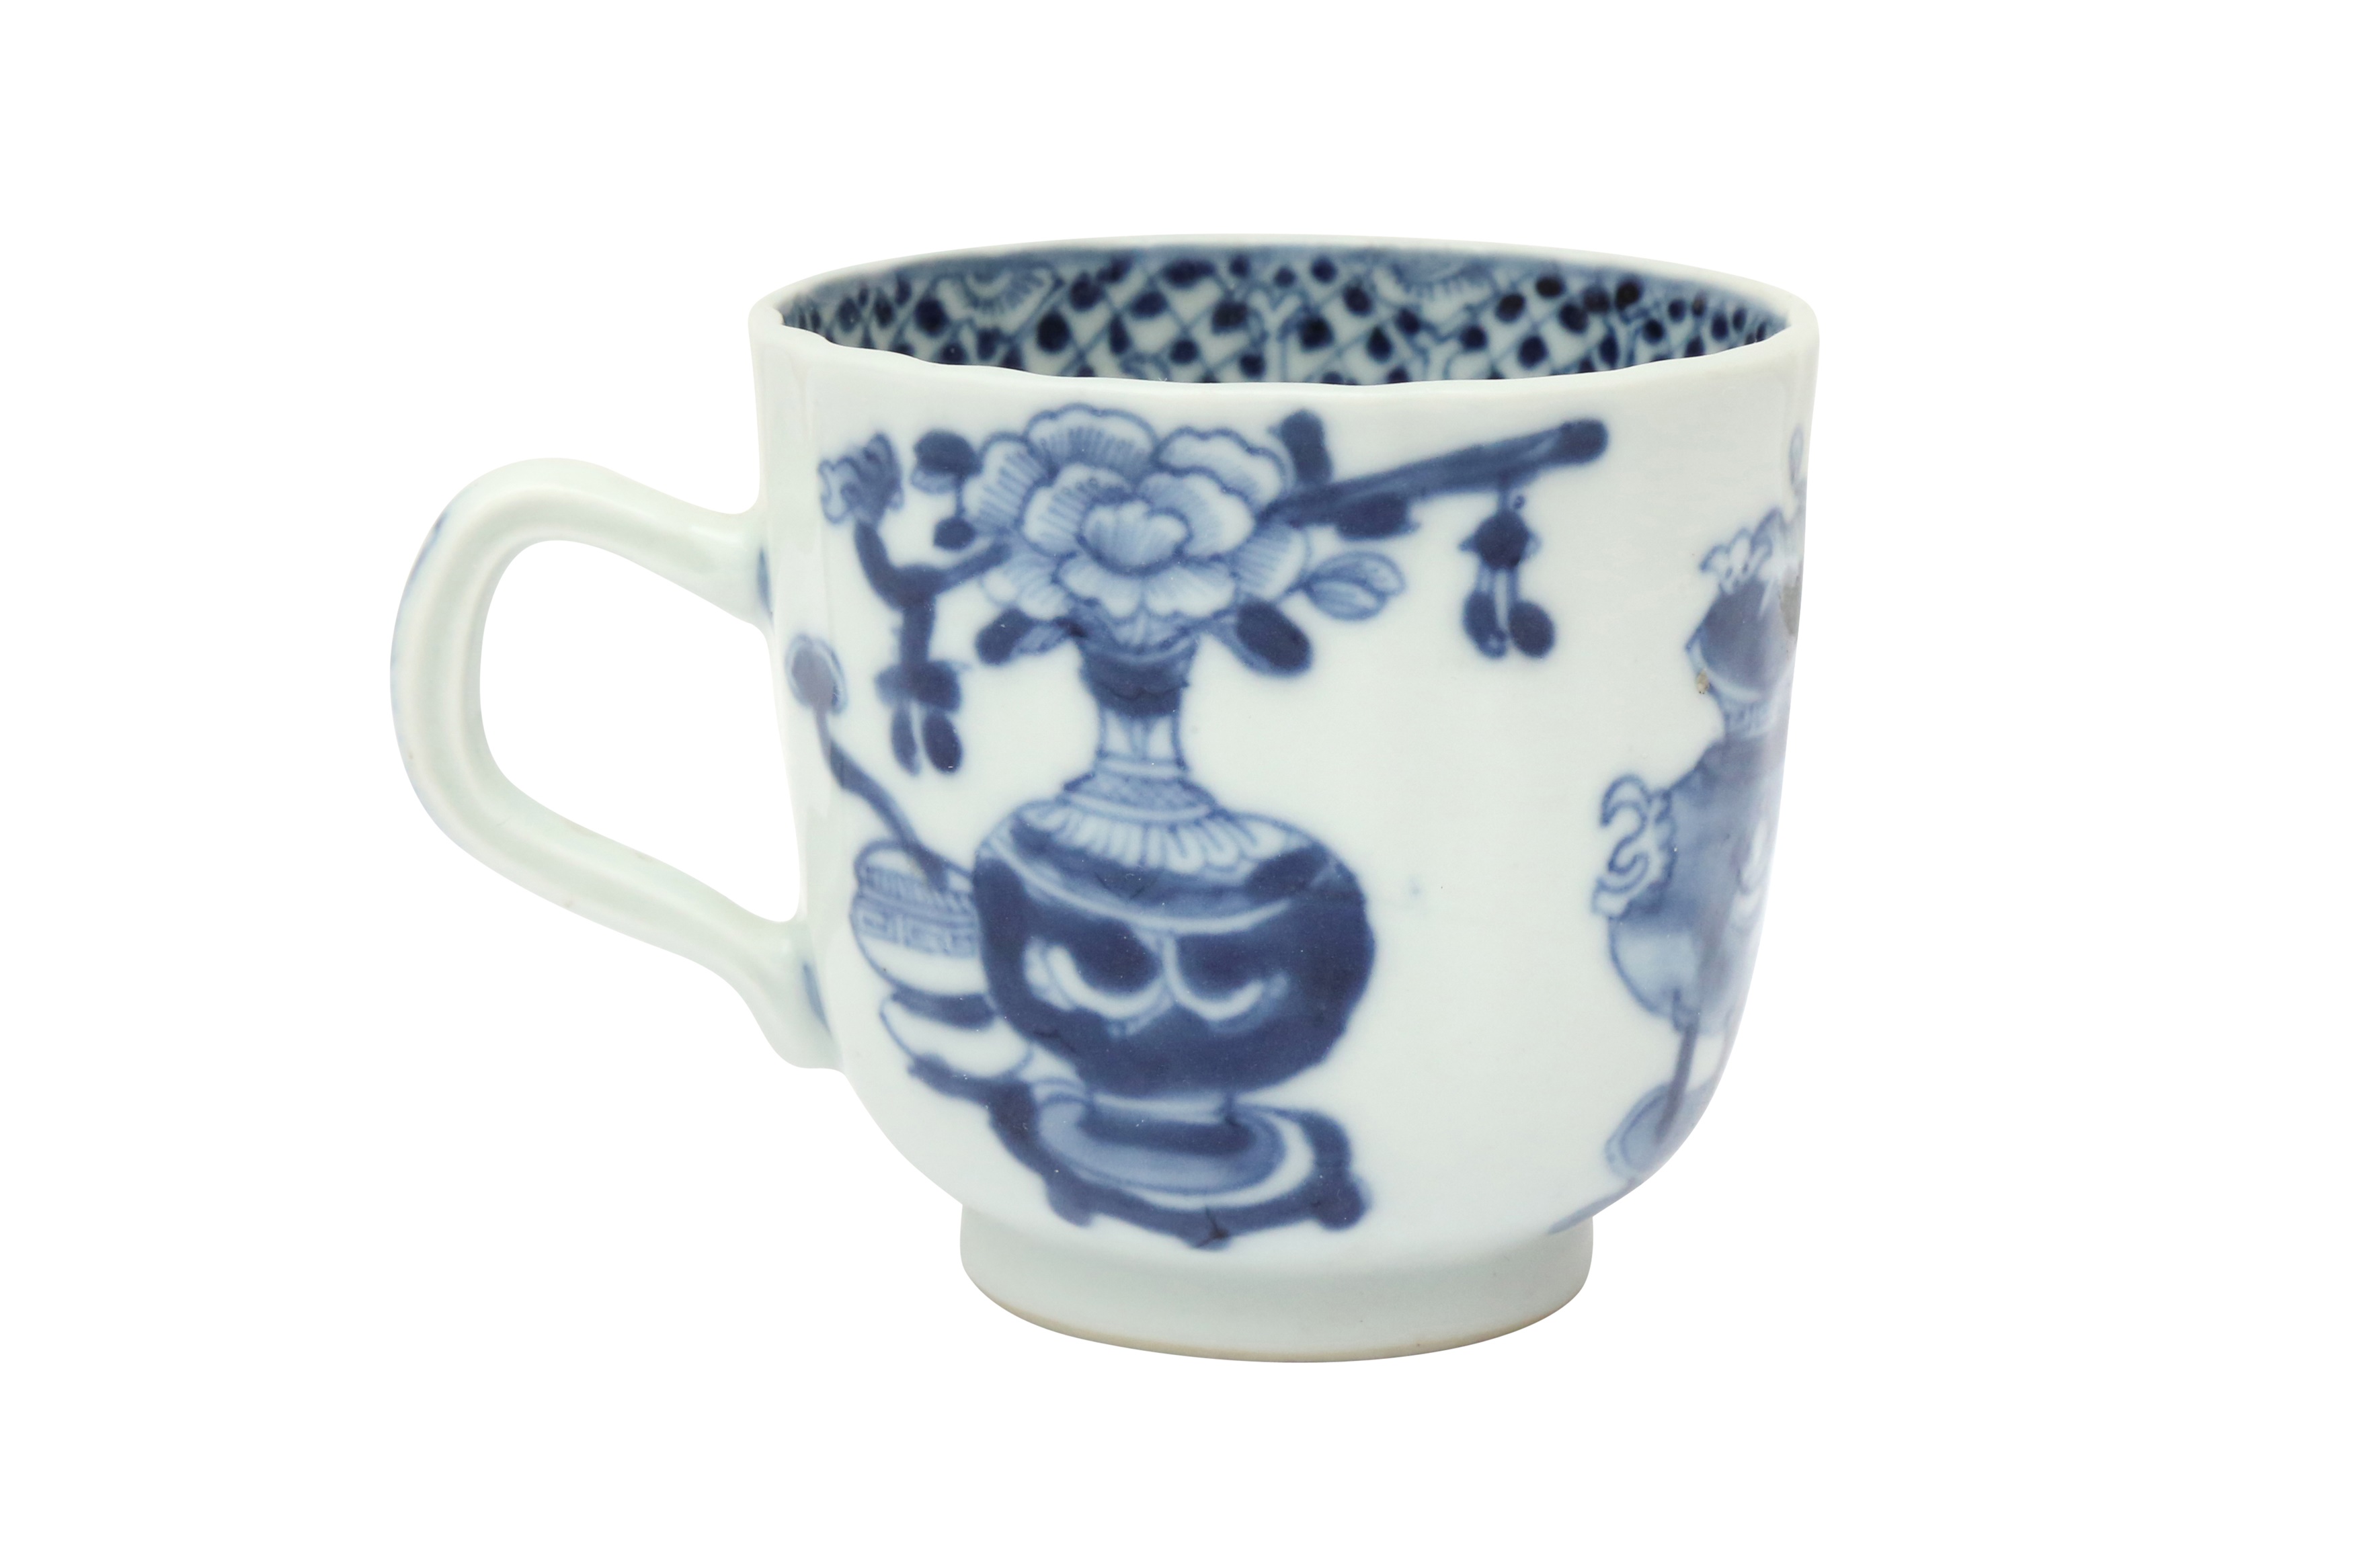 A CHINESE EXPORT BLUE AND WHITE 'TREASURES' CUP 十八至十九世紀 外銷青花博古圖紋盃